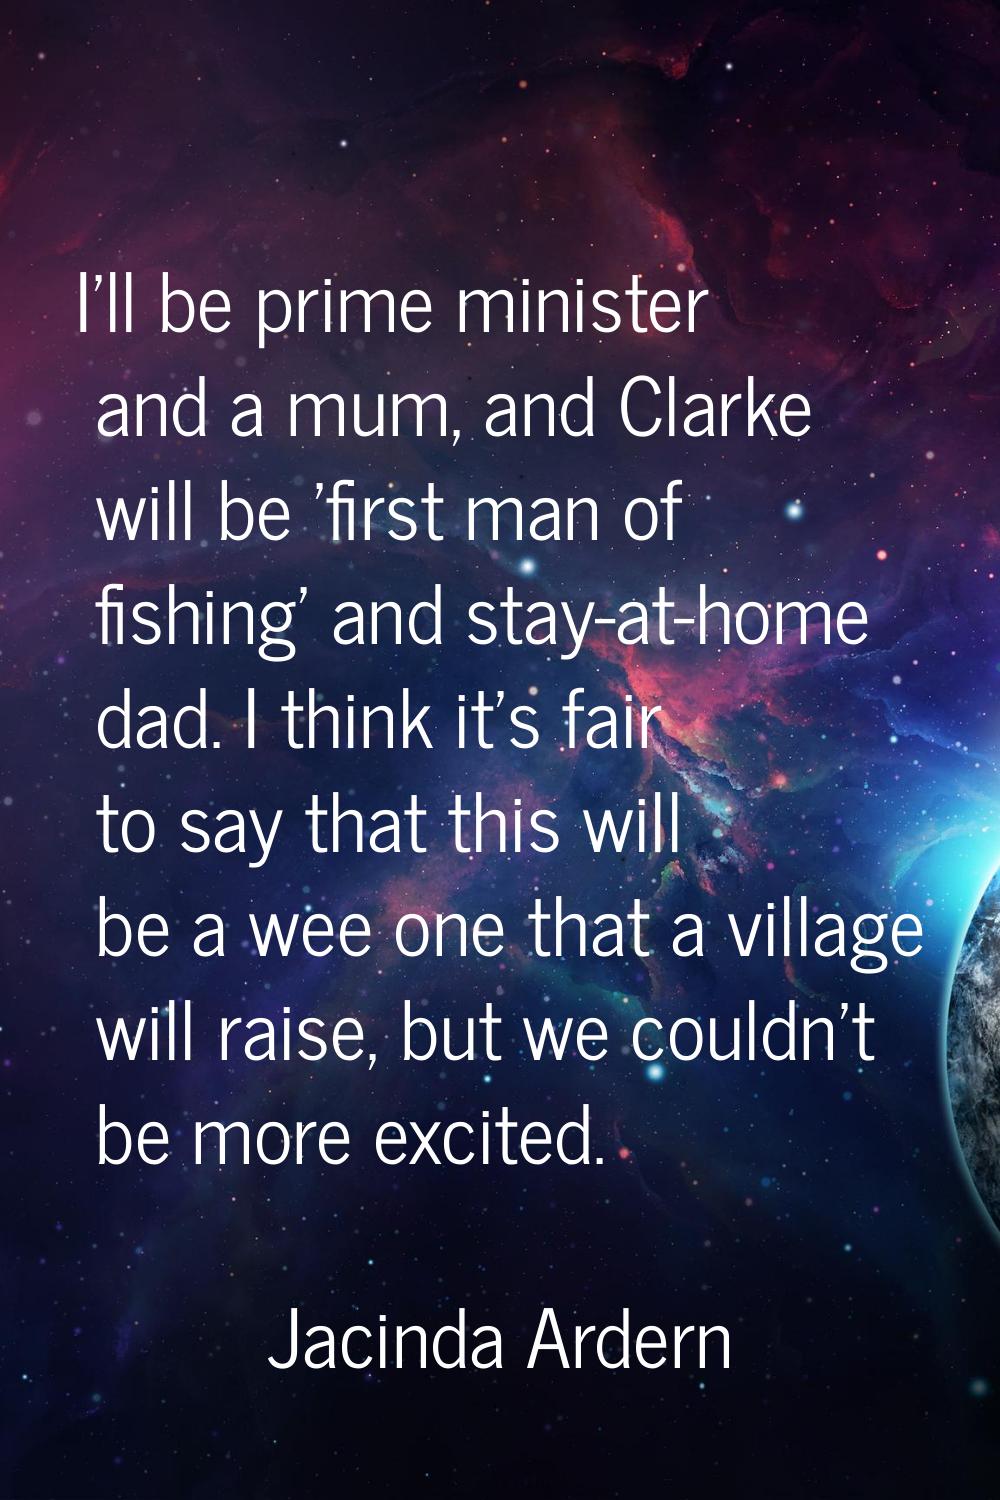 I'll be prime minister and a mum, and Clarke will be 'first man of fishing' and stay-at-home dad. I